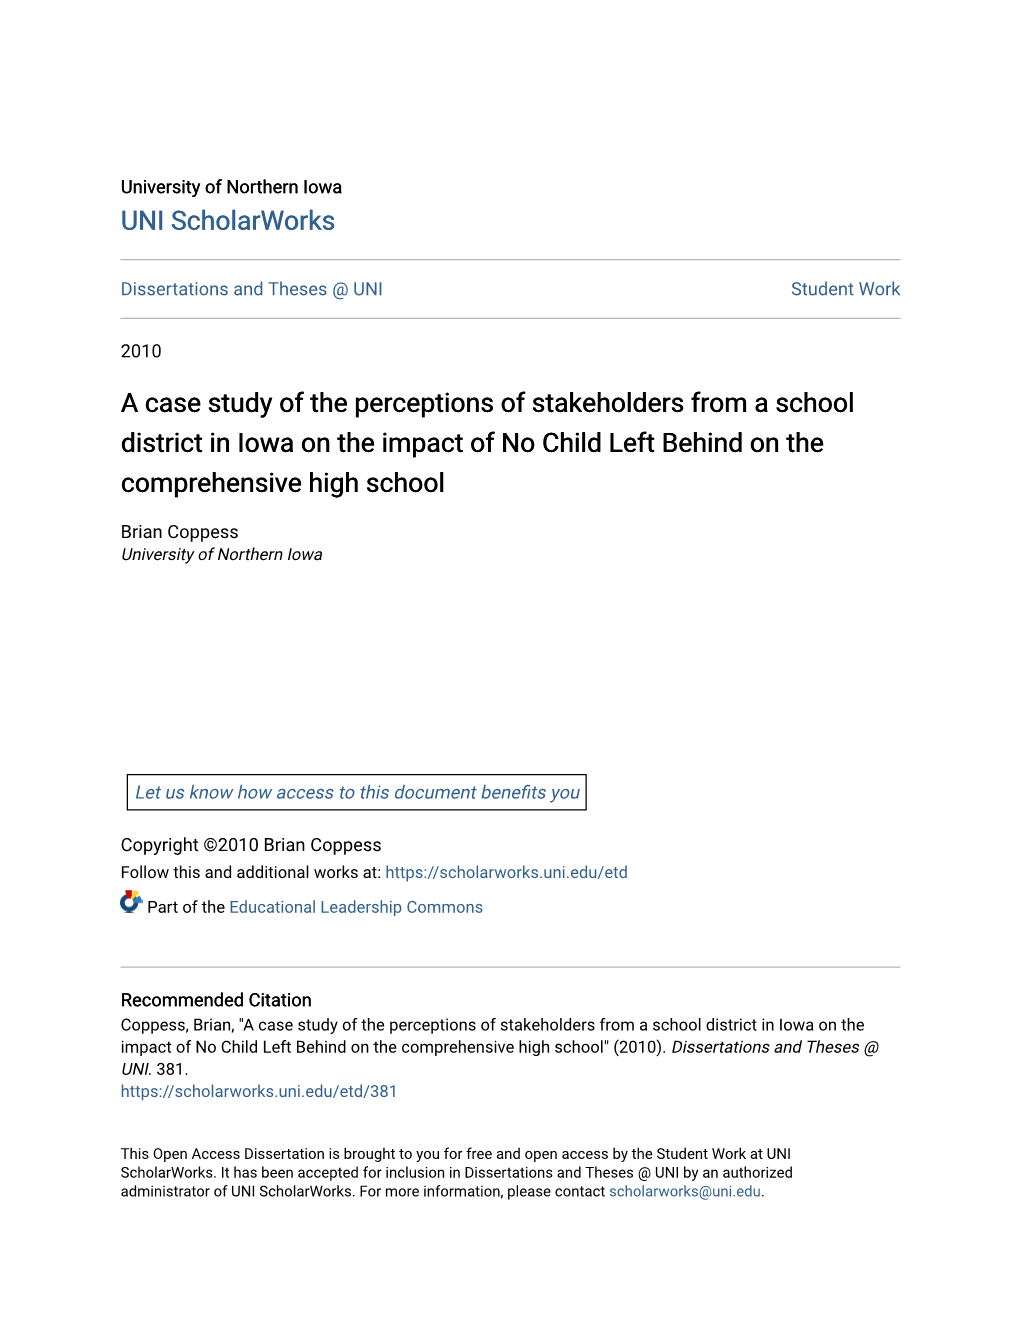 A Case Study of the Perceptions of Stakeholders from a School District in Iowa on the Impact of No Child Left Behind on the Comprehensive High School